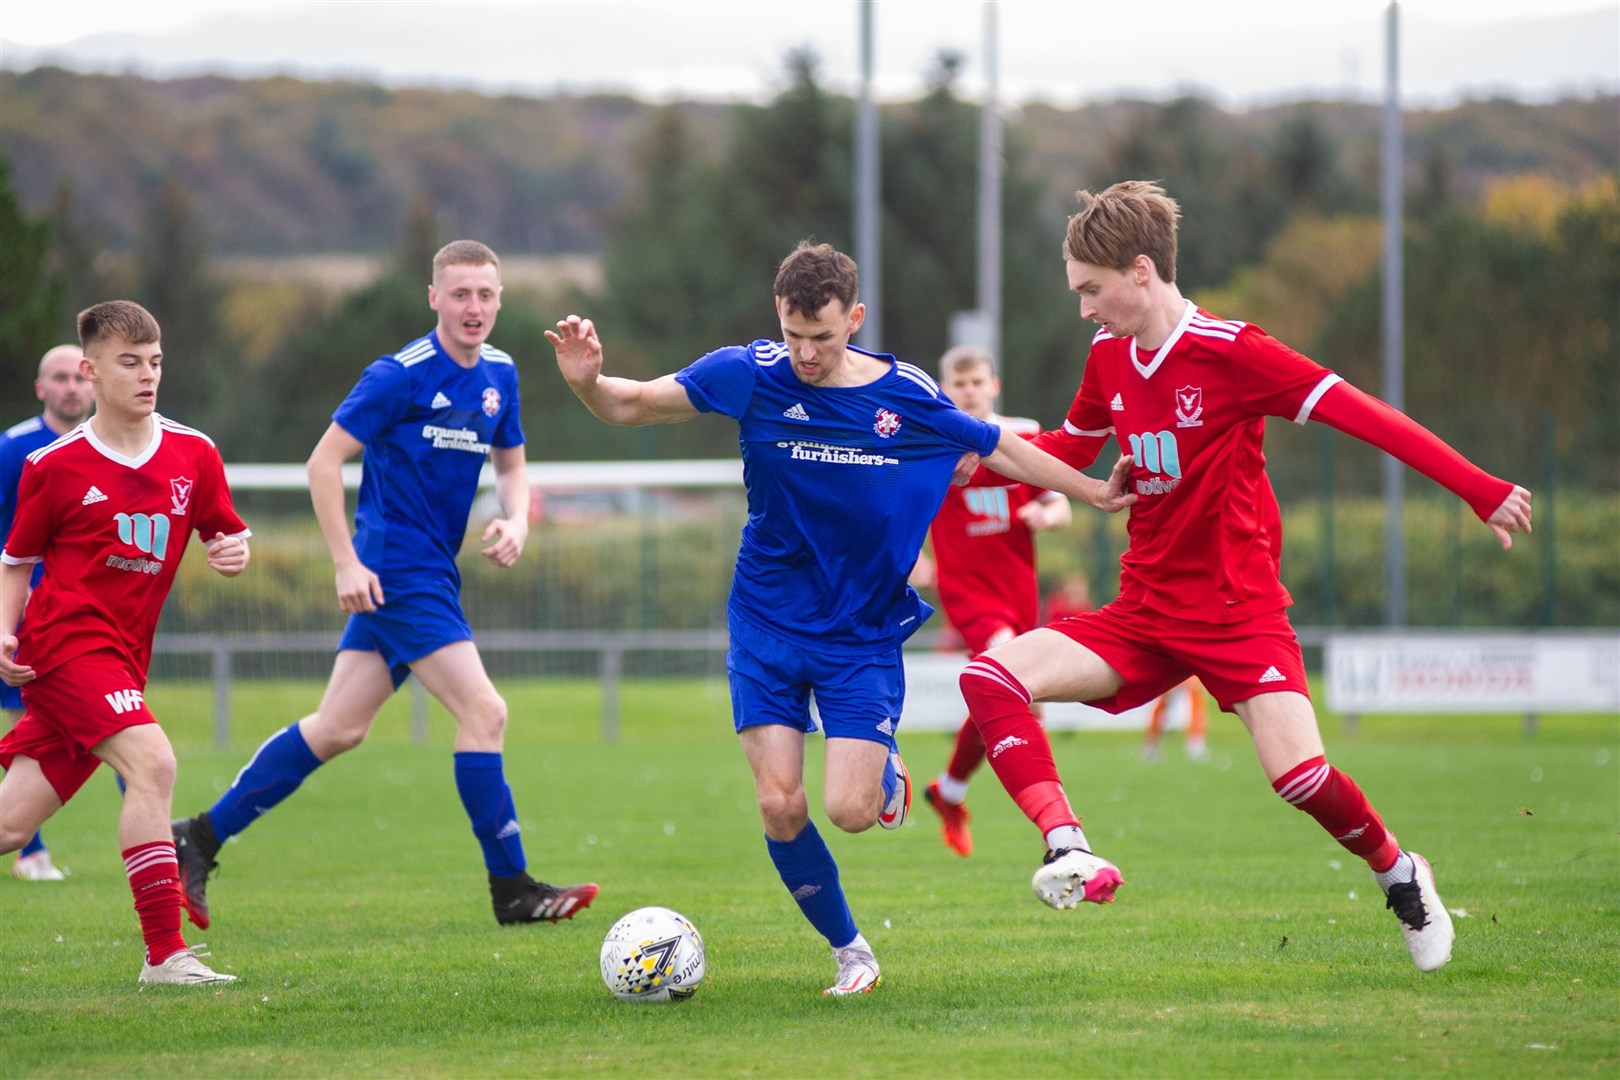 Lossiemouth's Ryan Farquhar, who would see red later in the game, tries to weave his way through the Vale midfield. ..Deveronvale FC (6) vs Lossiemouth FC (0) - Highland Football League - Princess Royal Park, Banff 23/10/2021...Picture: Daniel Forsyth..